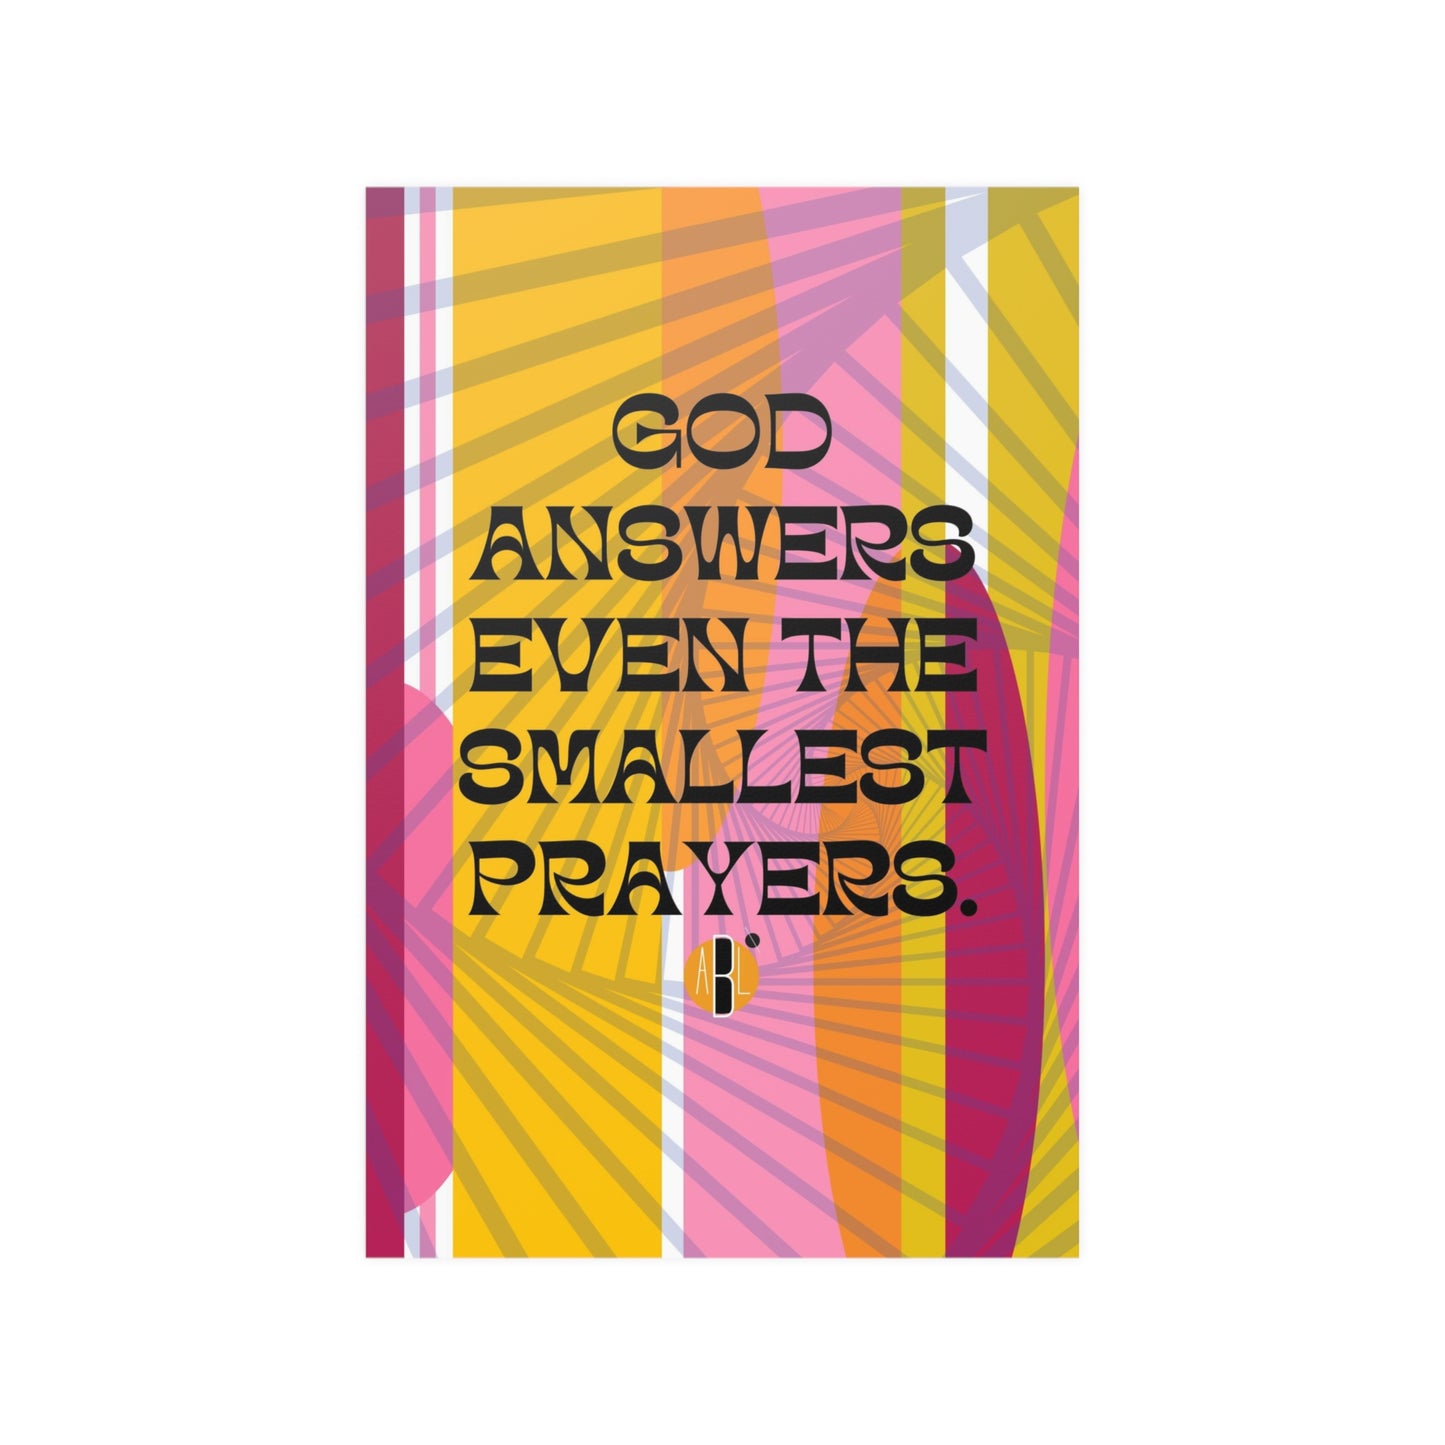 ABL Inspirational Poster: " God answers even...."